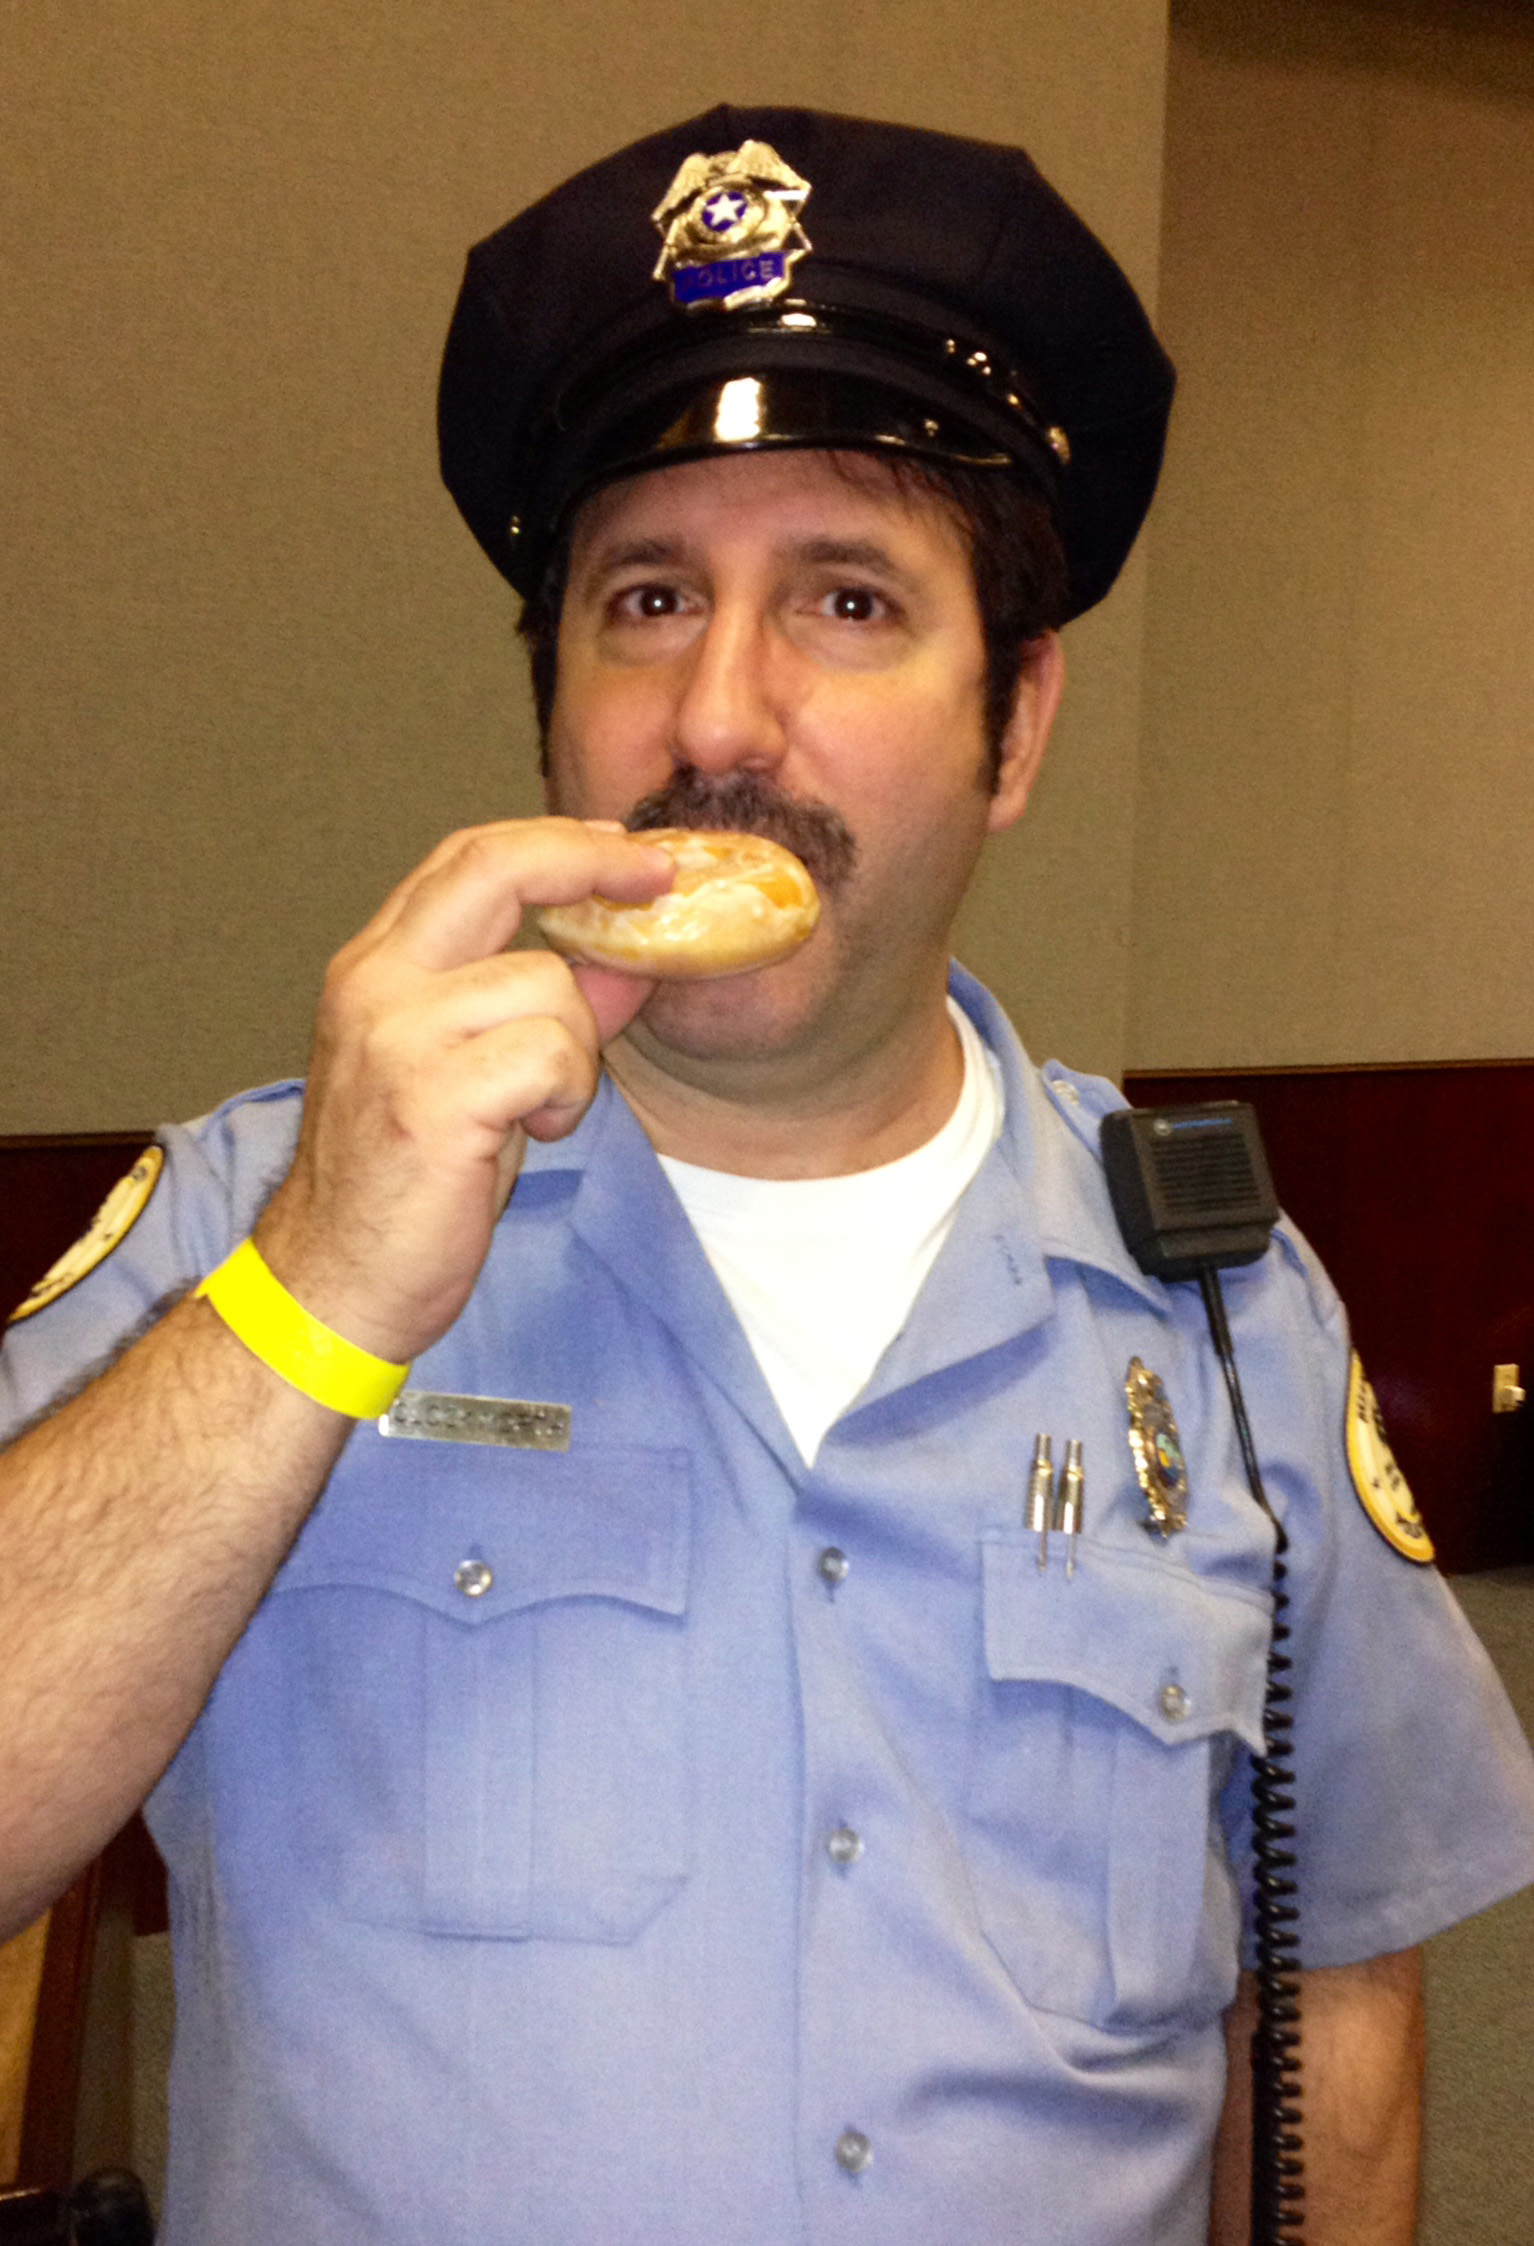 Officer Clockworth on the job and working hard - from Hoke.